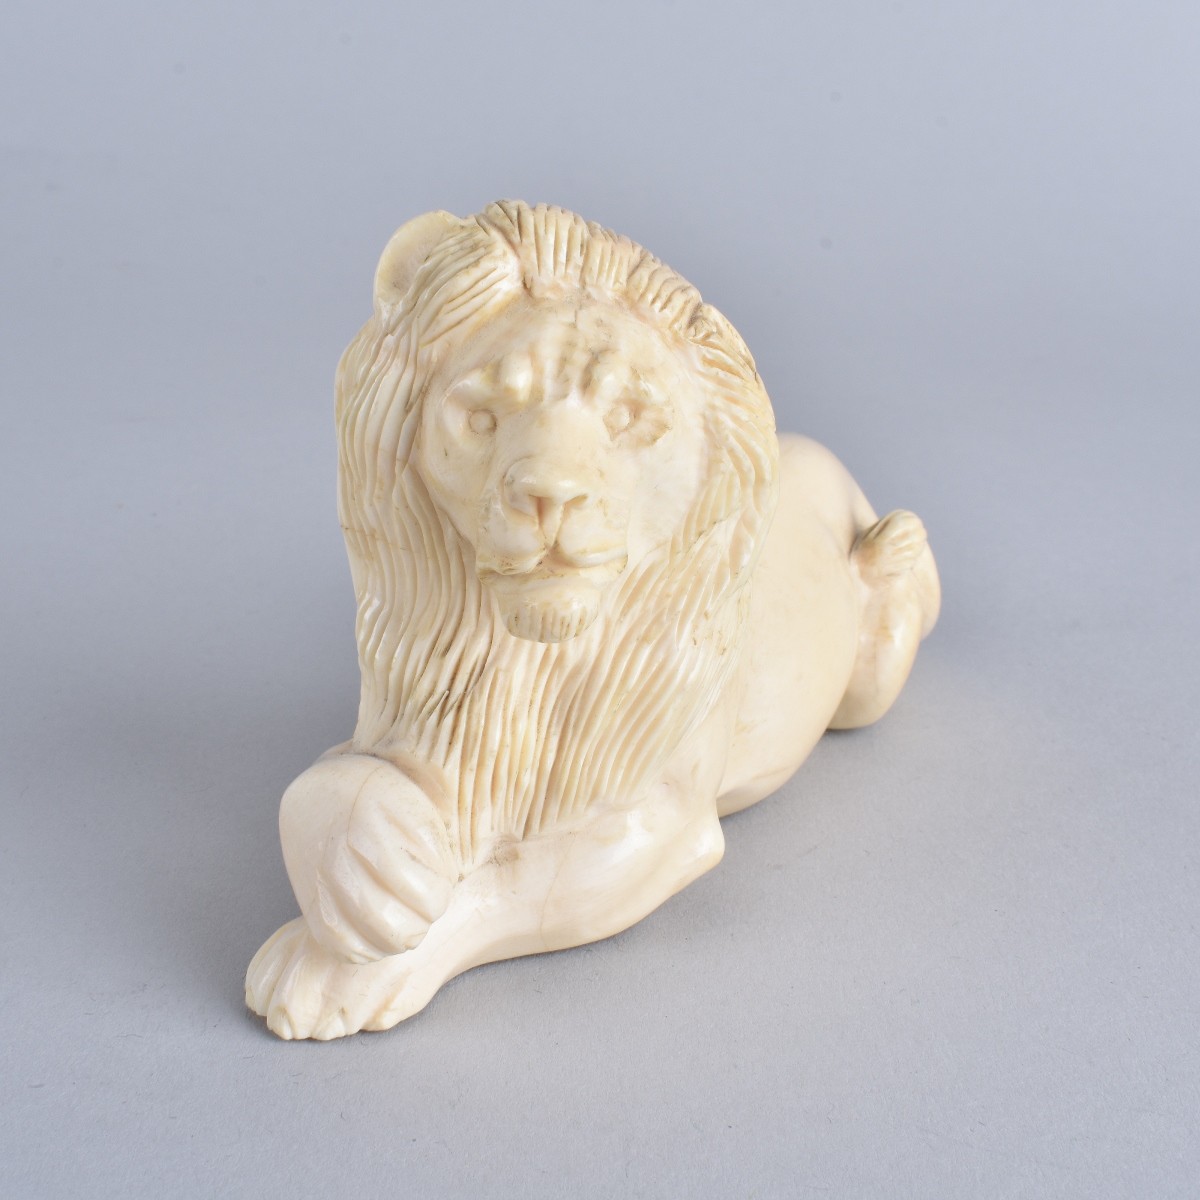 Carved Ivory Lions